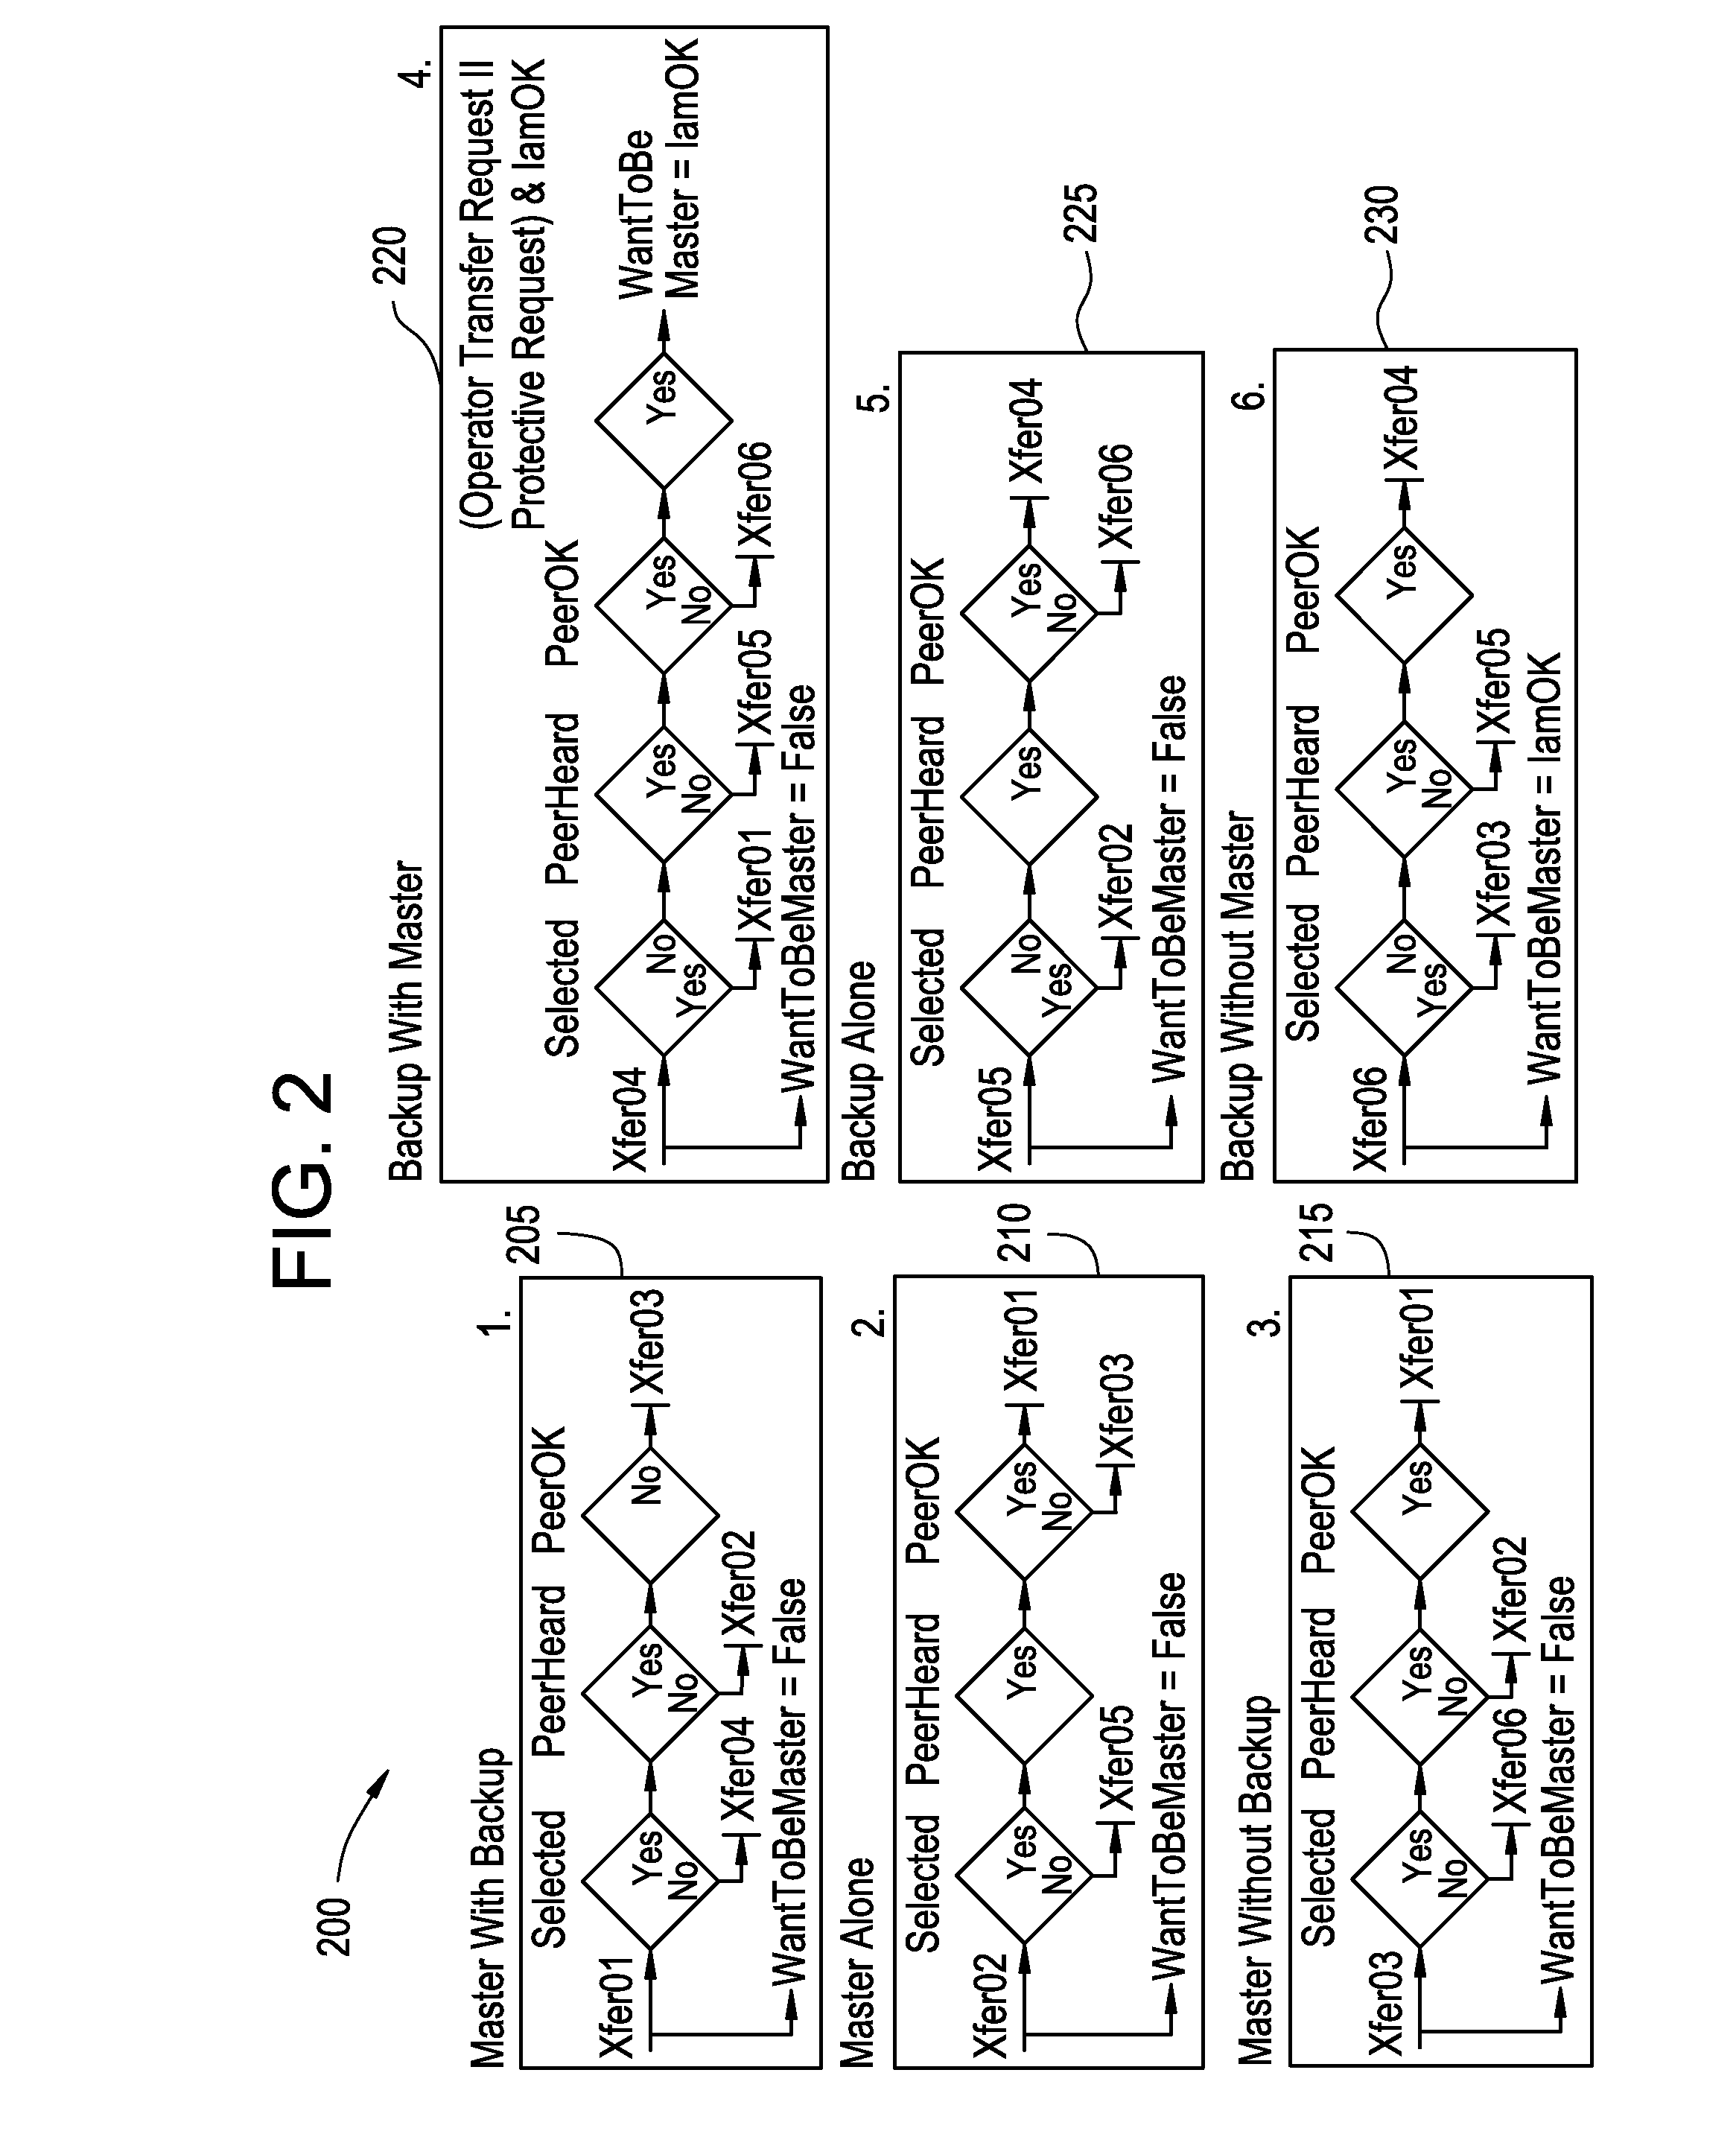 Generator regulating system and method with dual controllers